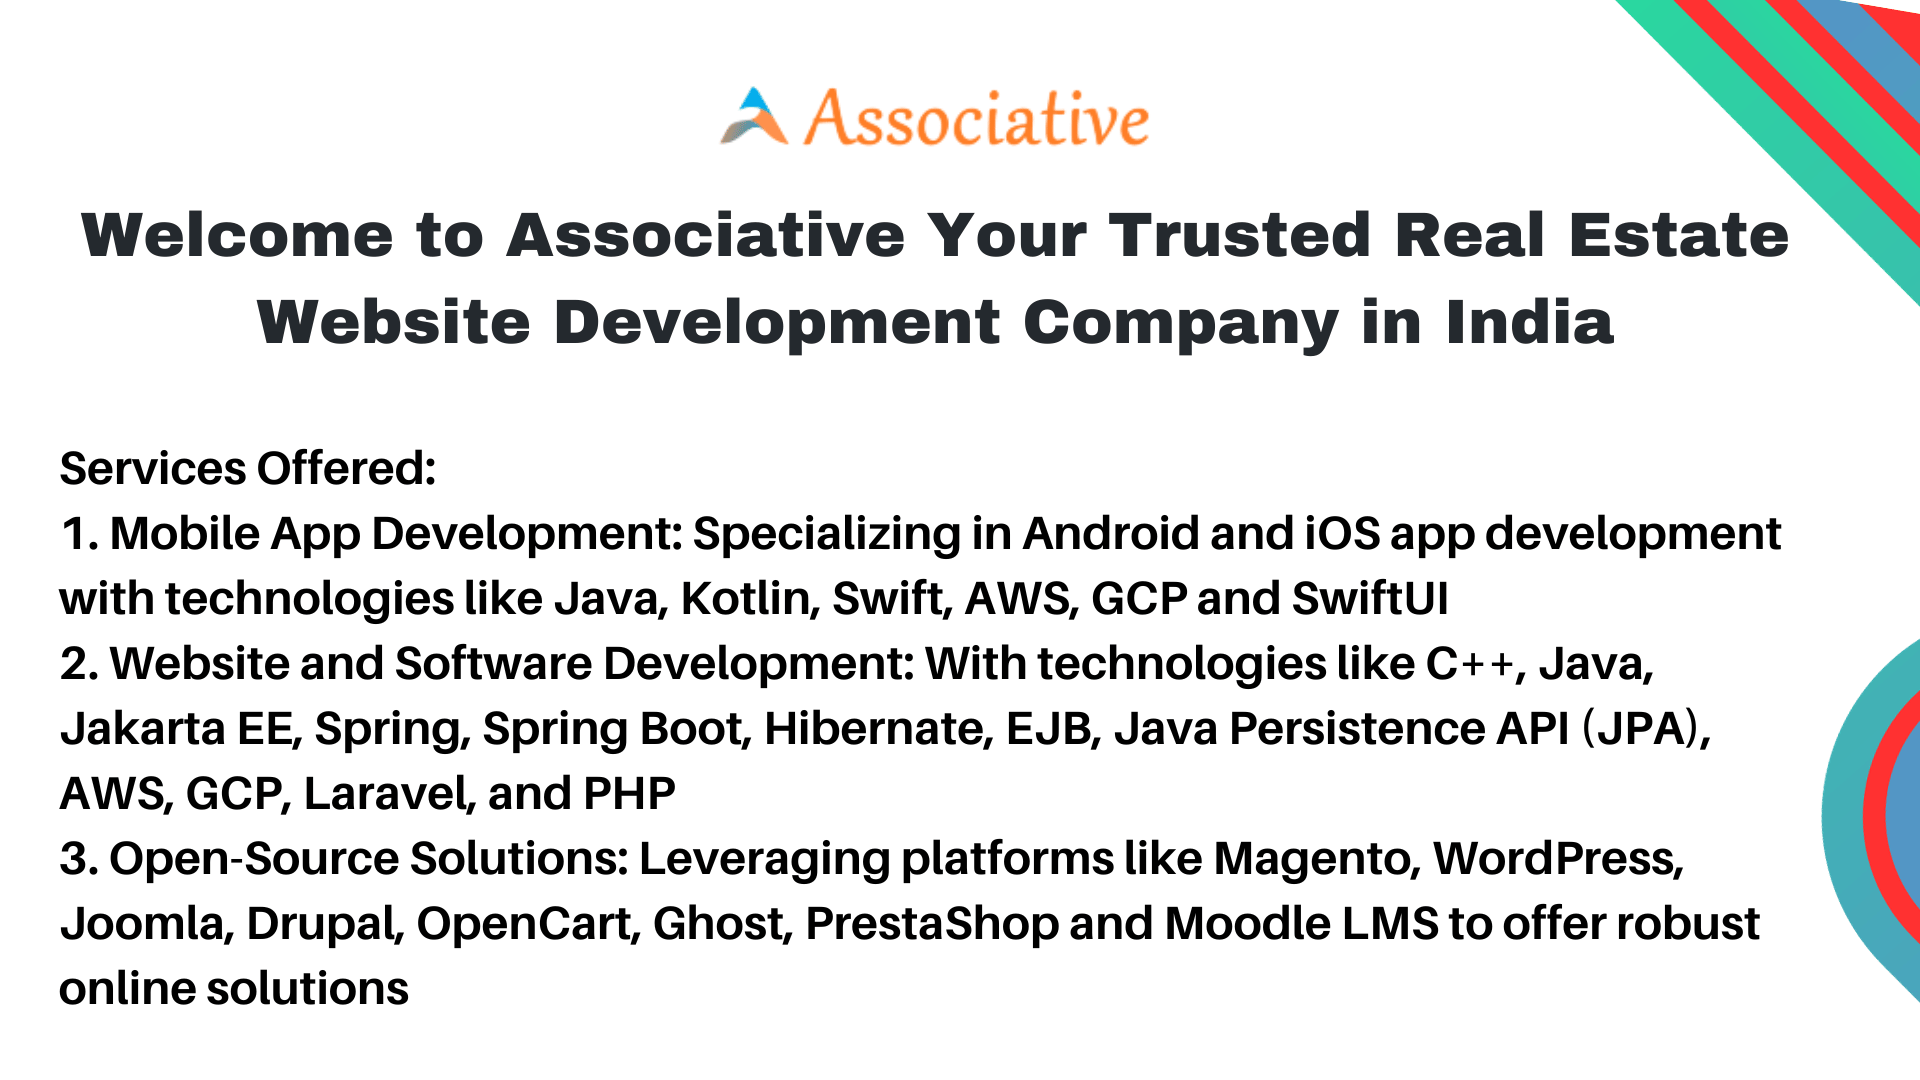 Welcome to Associative Your Trusted Real Estate Website Development Company in India